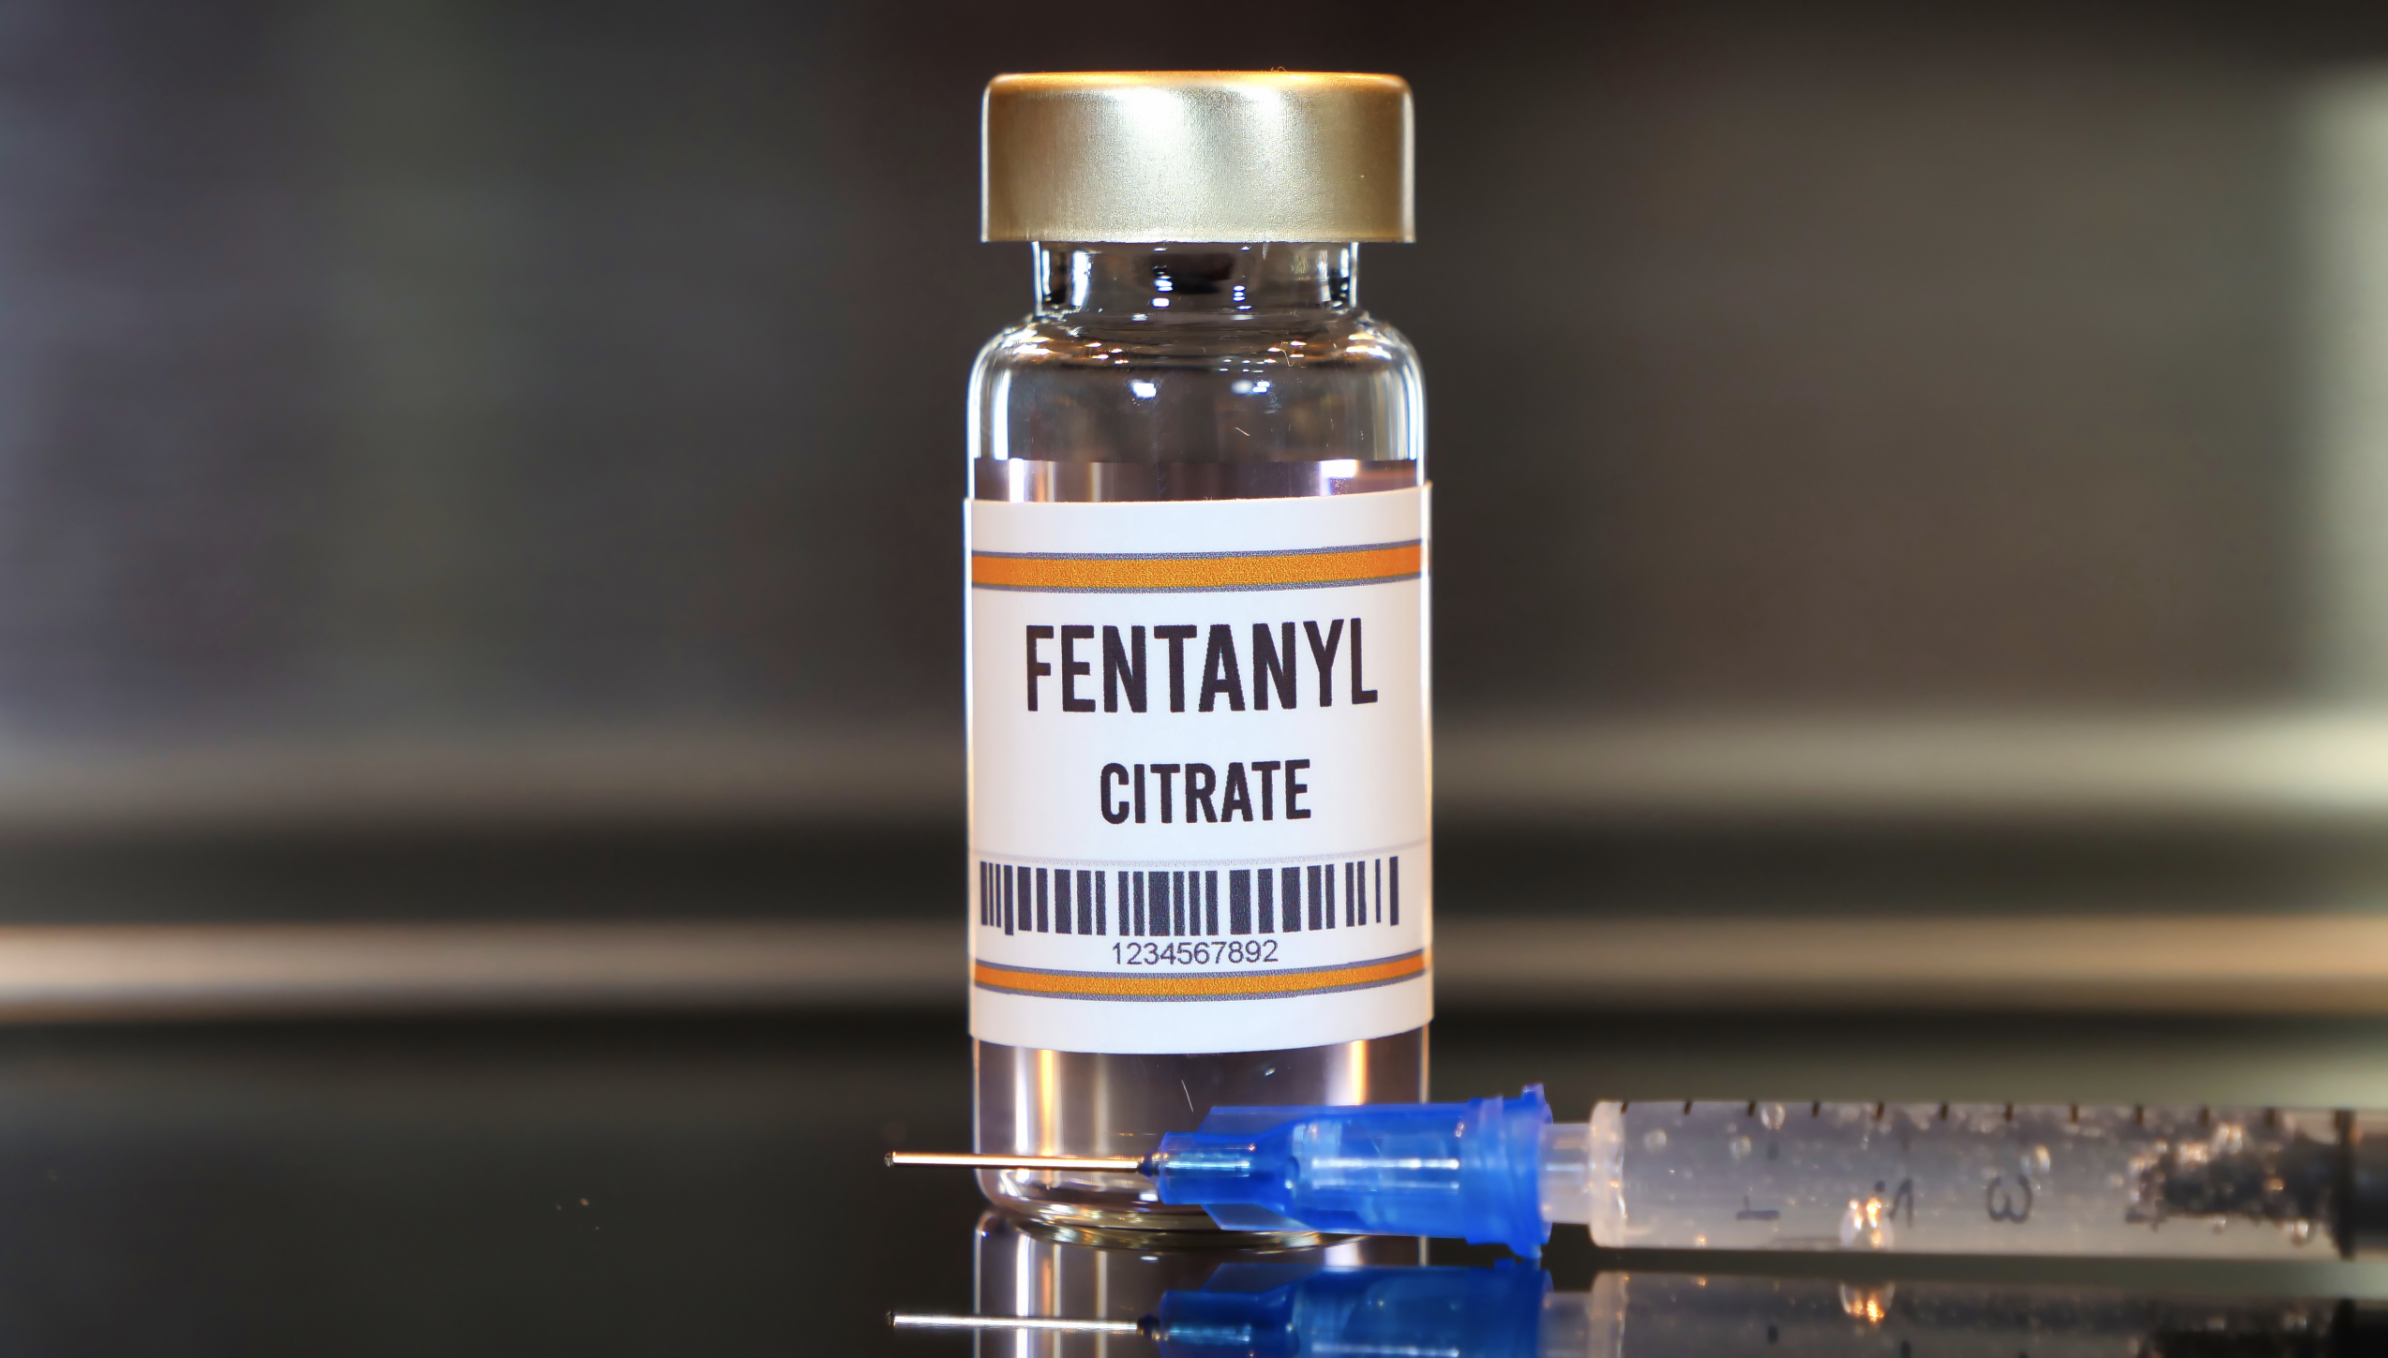 What is Fentanyl?